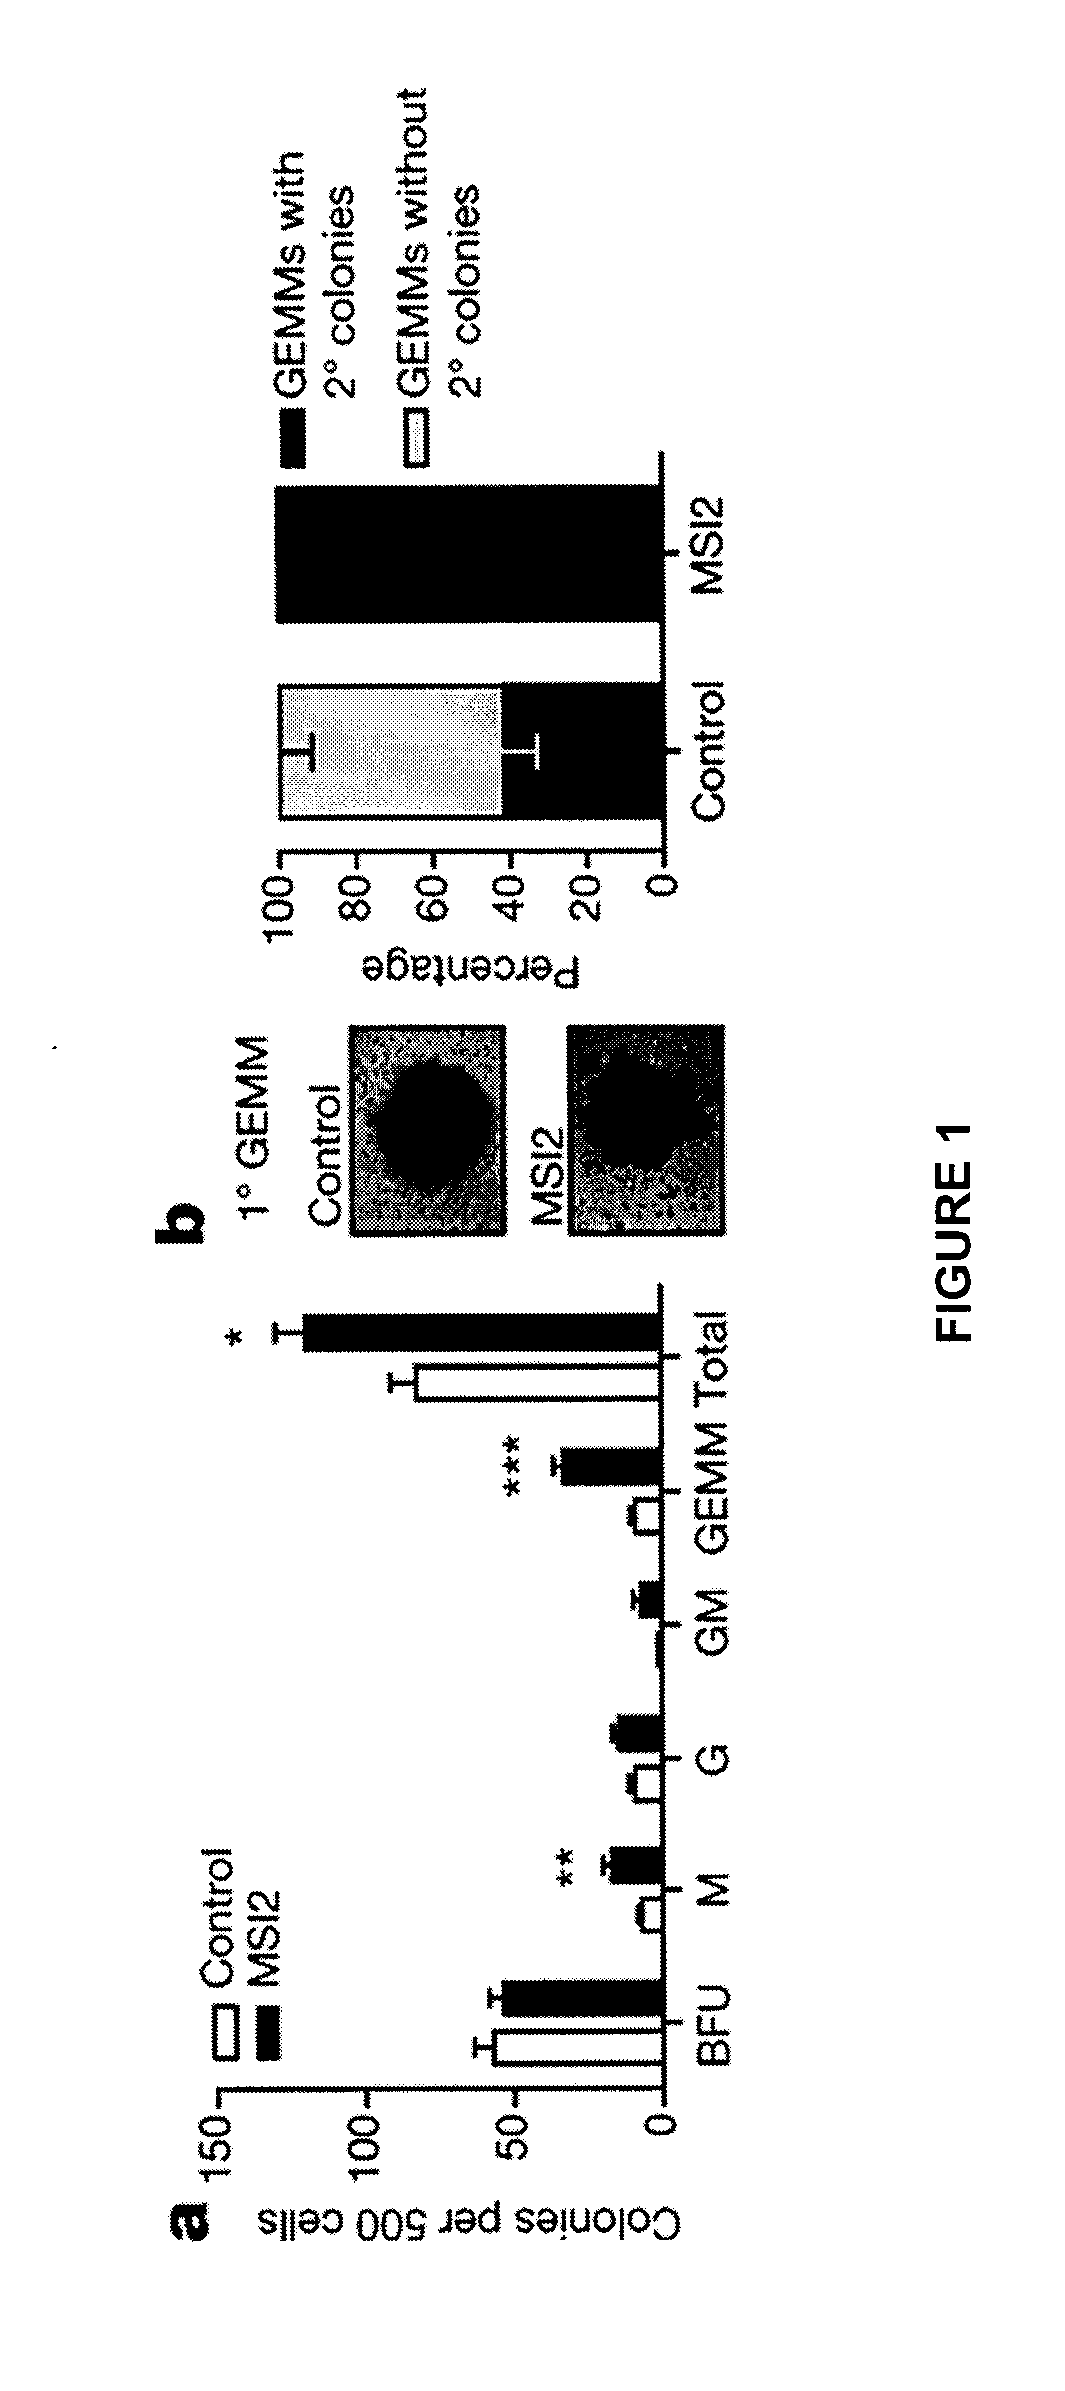 Methods and compositions for expansion of hematopoietic stem and/or progenitor cells employing a cytochrome p450 1b1 (cyp1b1) inhibitor or a musashi-2 (MSI2) activator